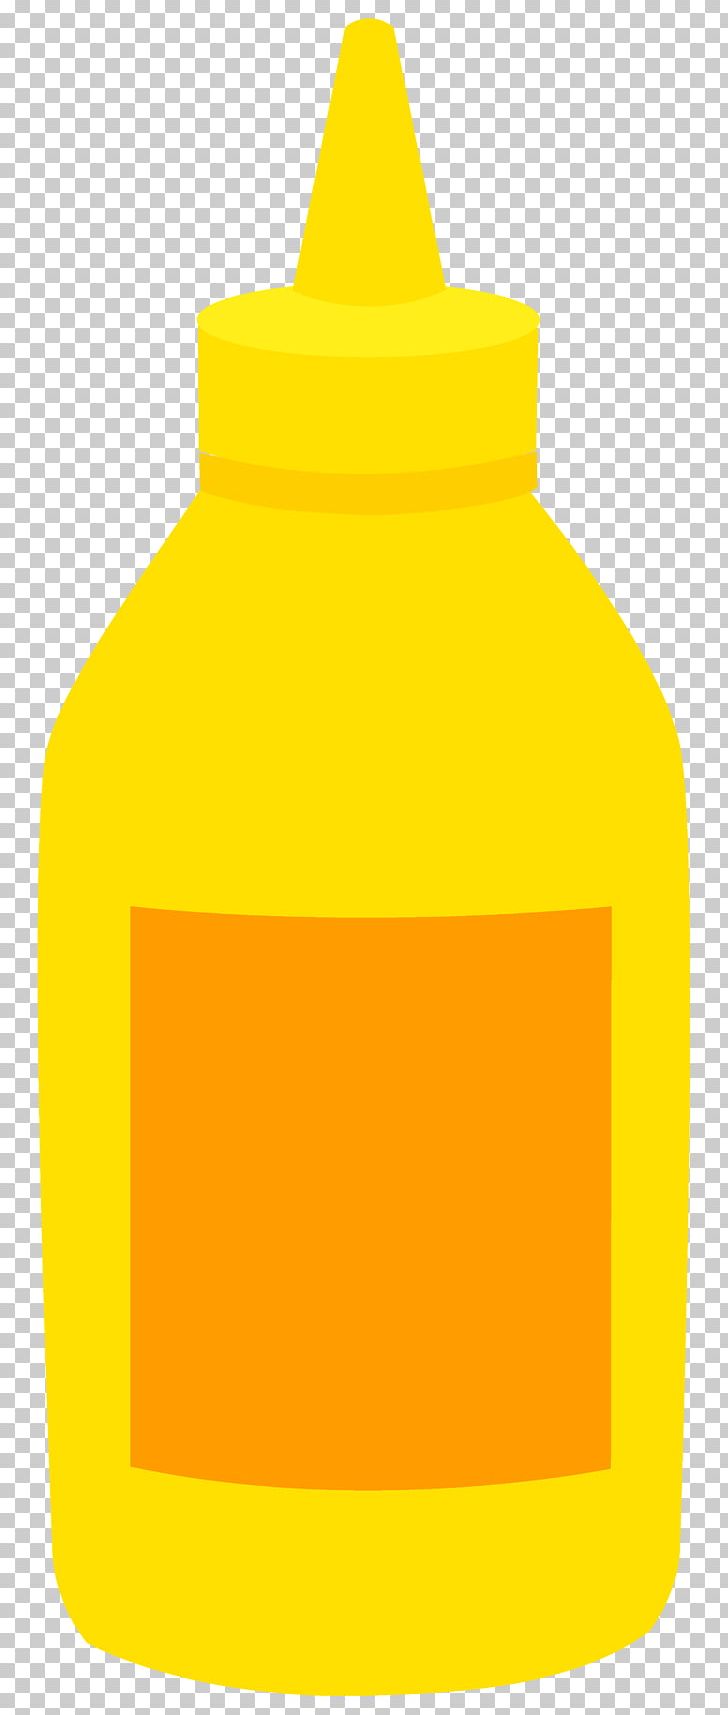 Bottle Material Yellow PNG, Clipart, Bottle, Drinkware, Ketchup, Line, Material Free PNG Download